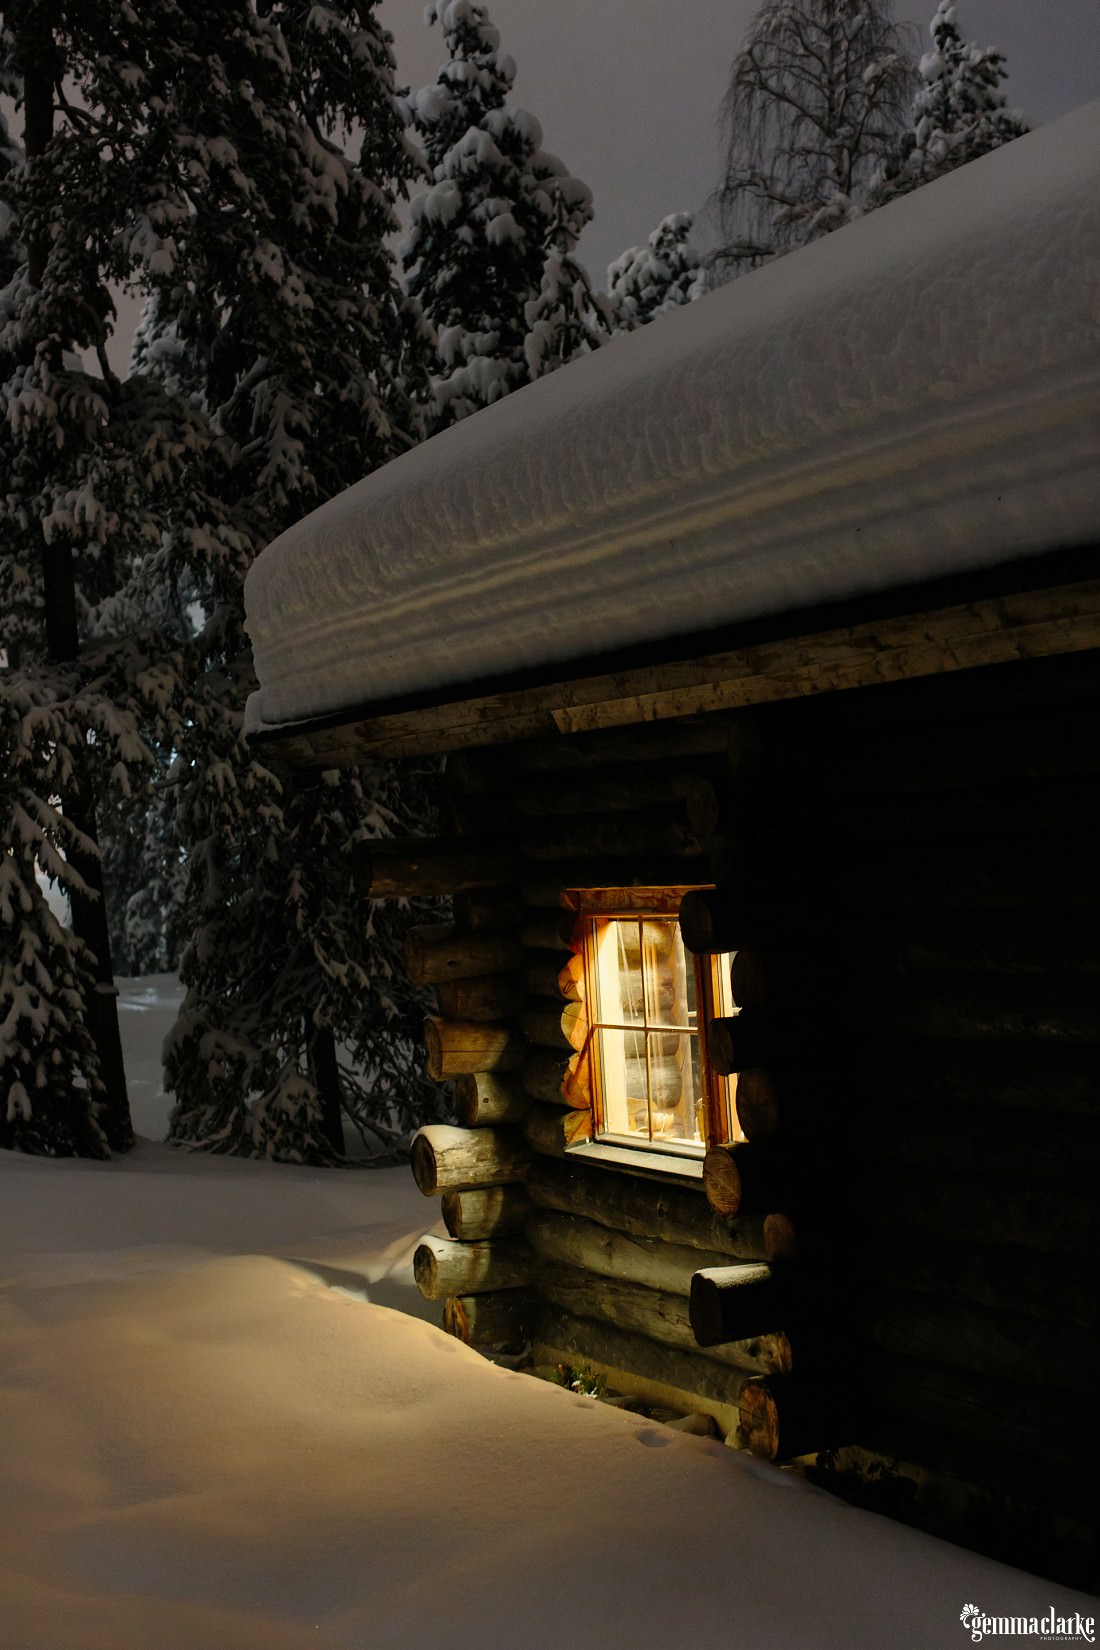 Light shining out from the window of a cabin with thick snow on the roof and ground